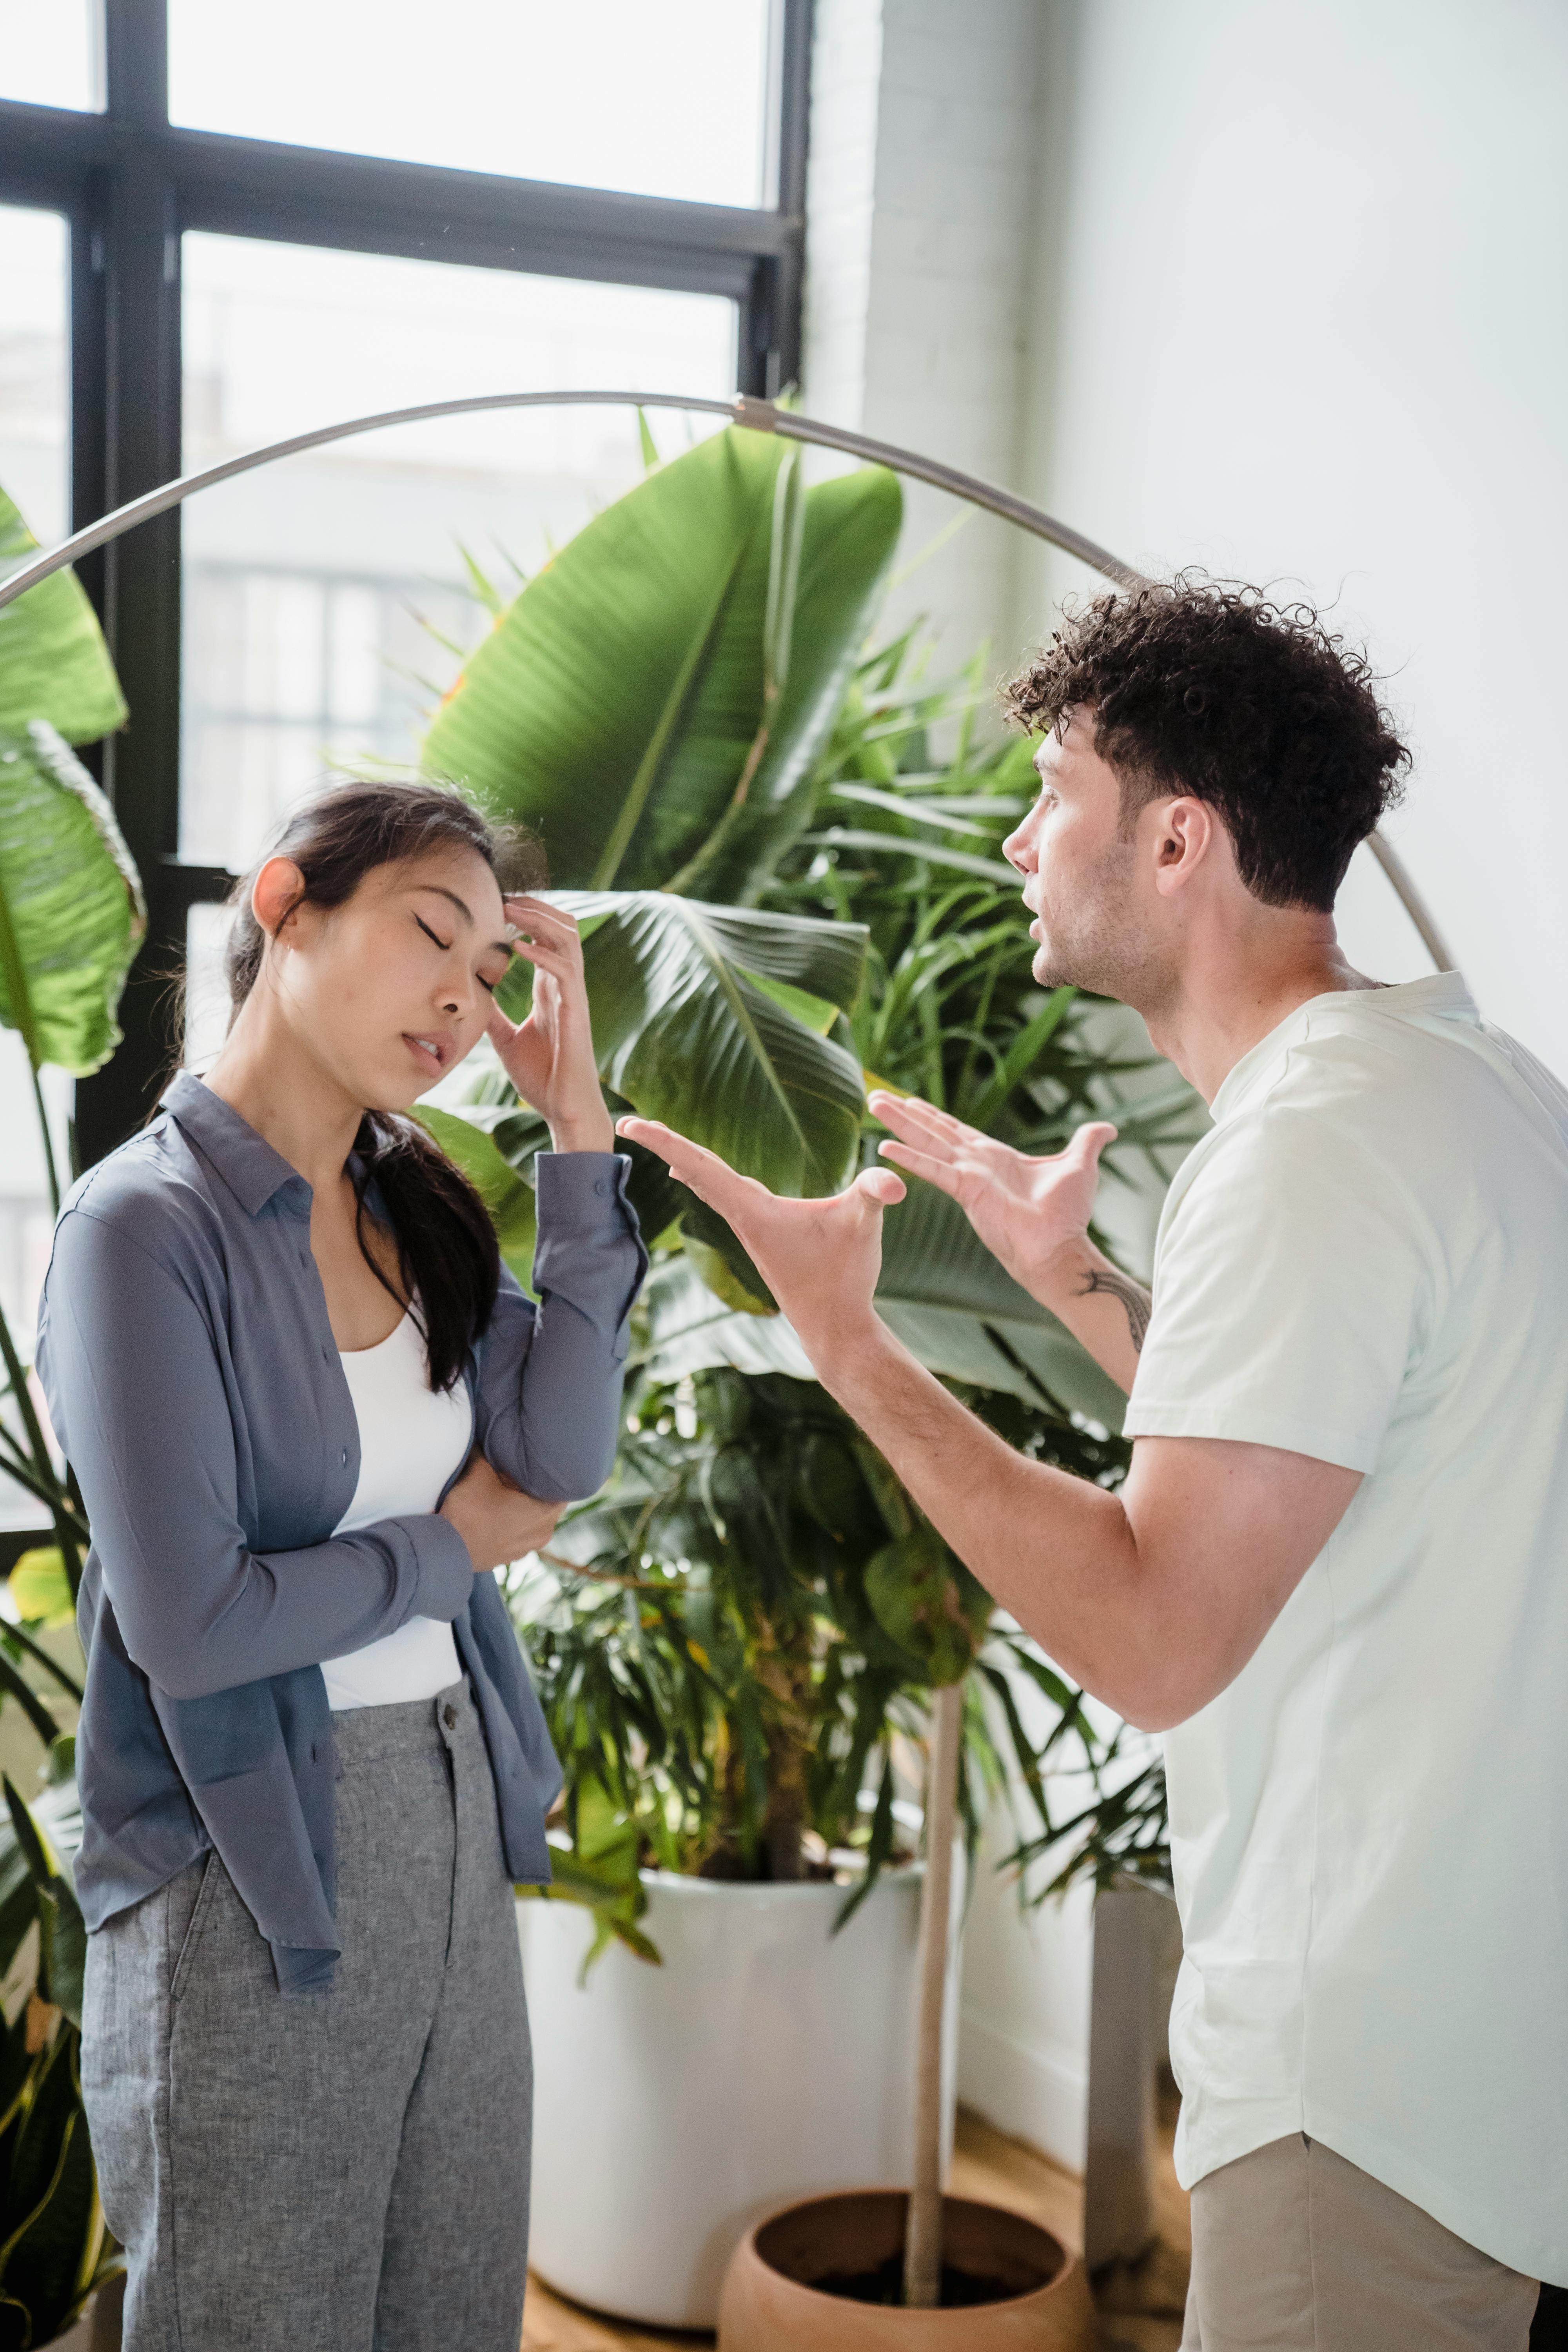 A man and woman arguing | Source: Pexels